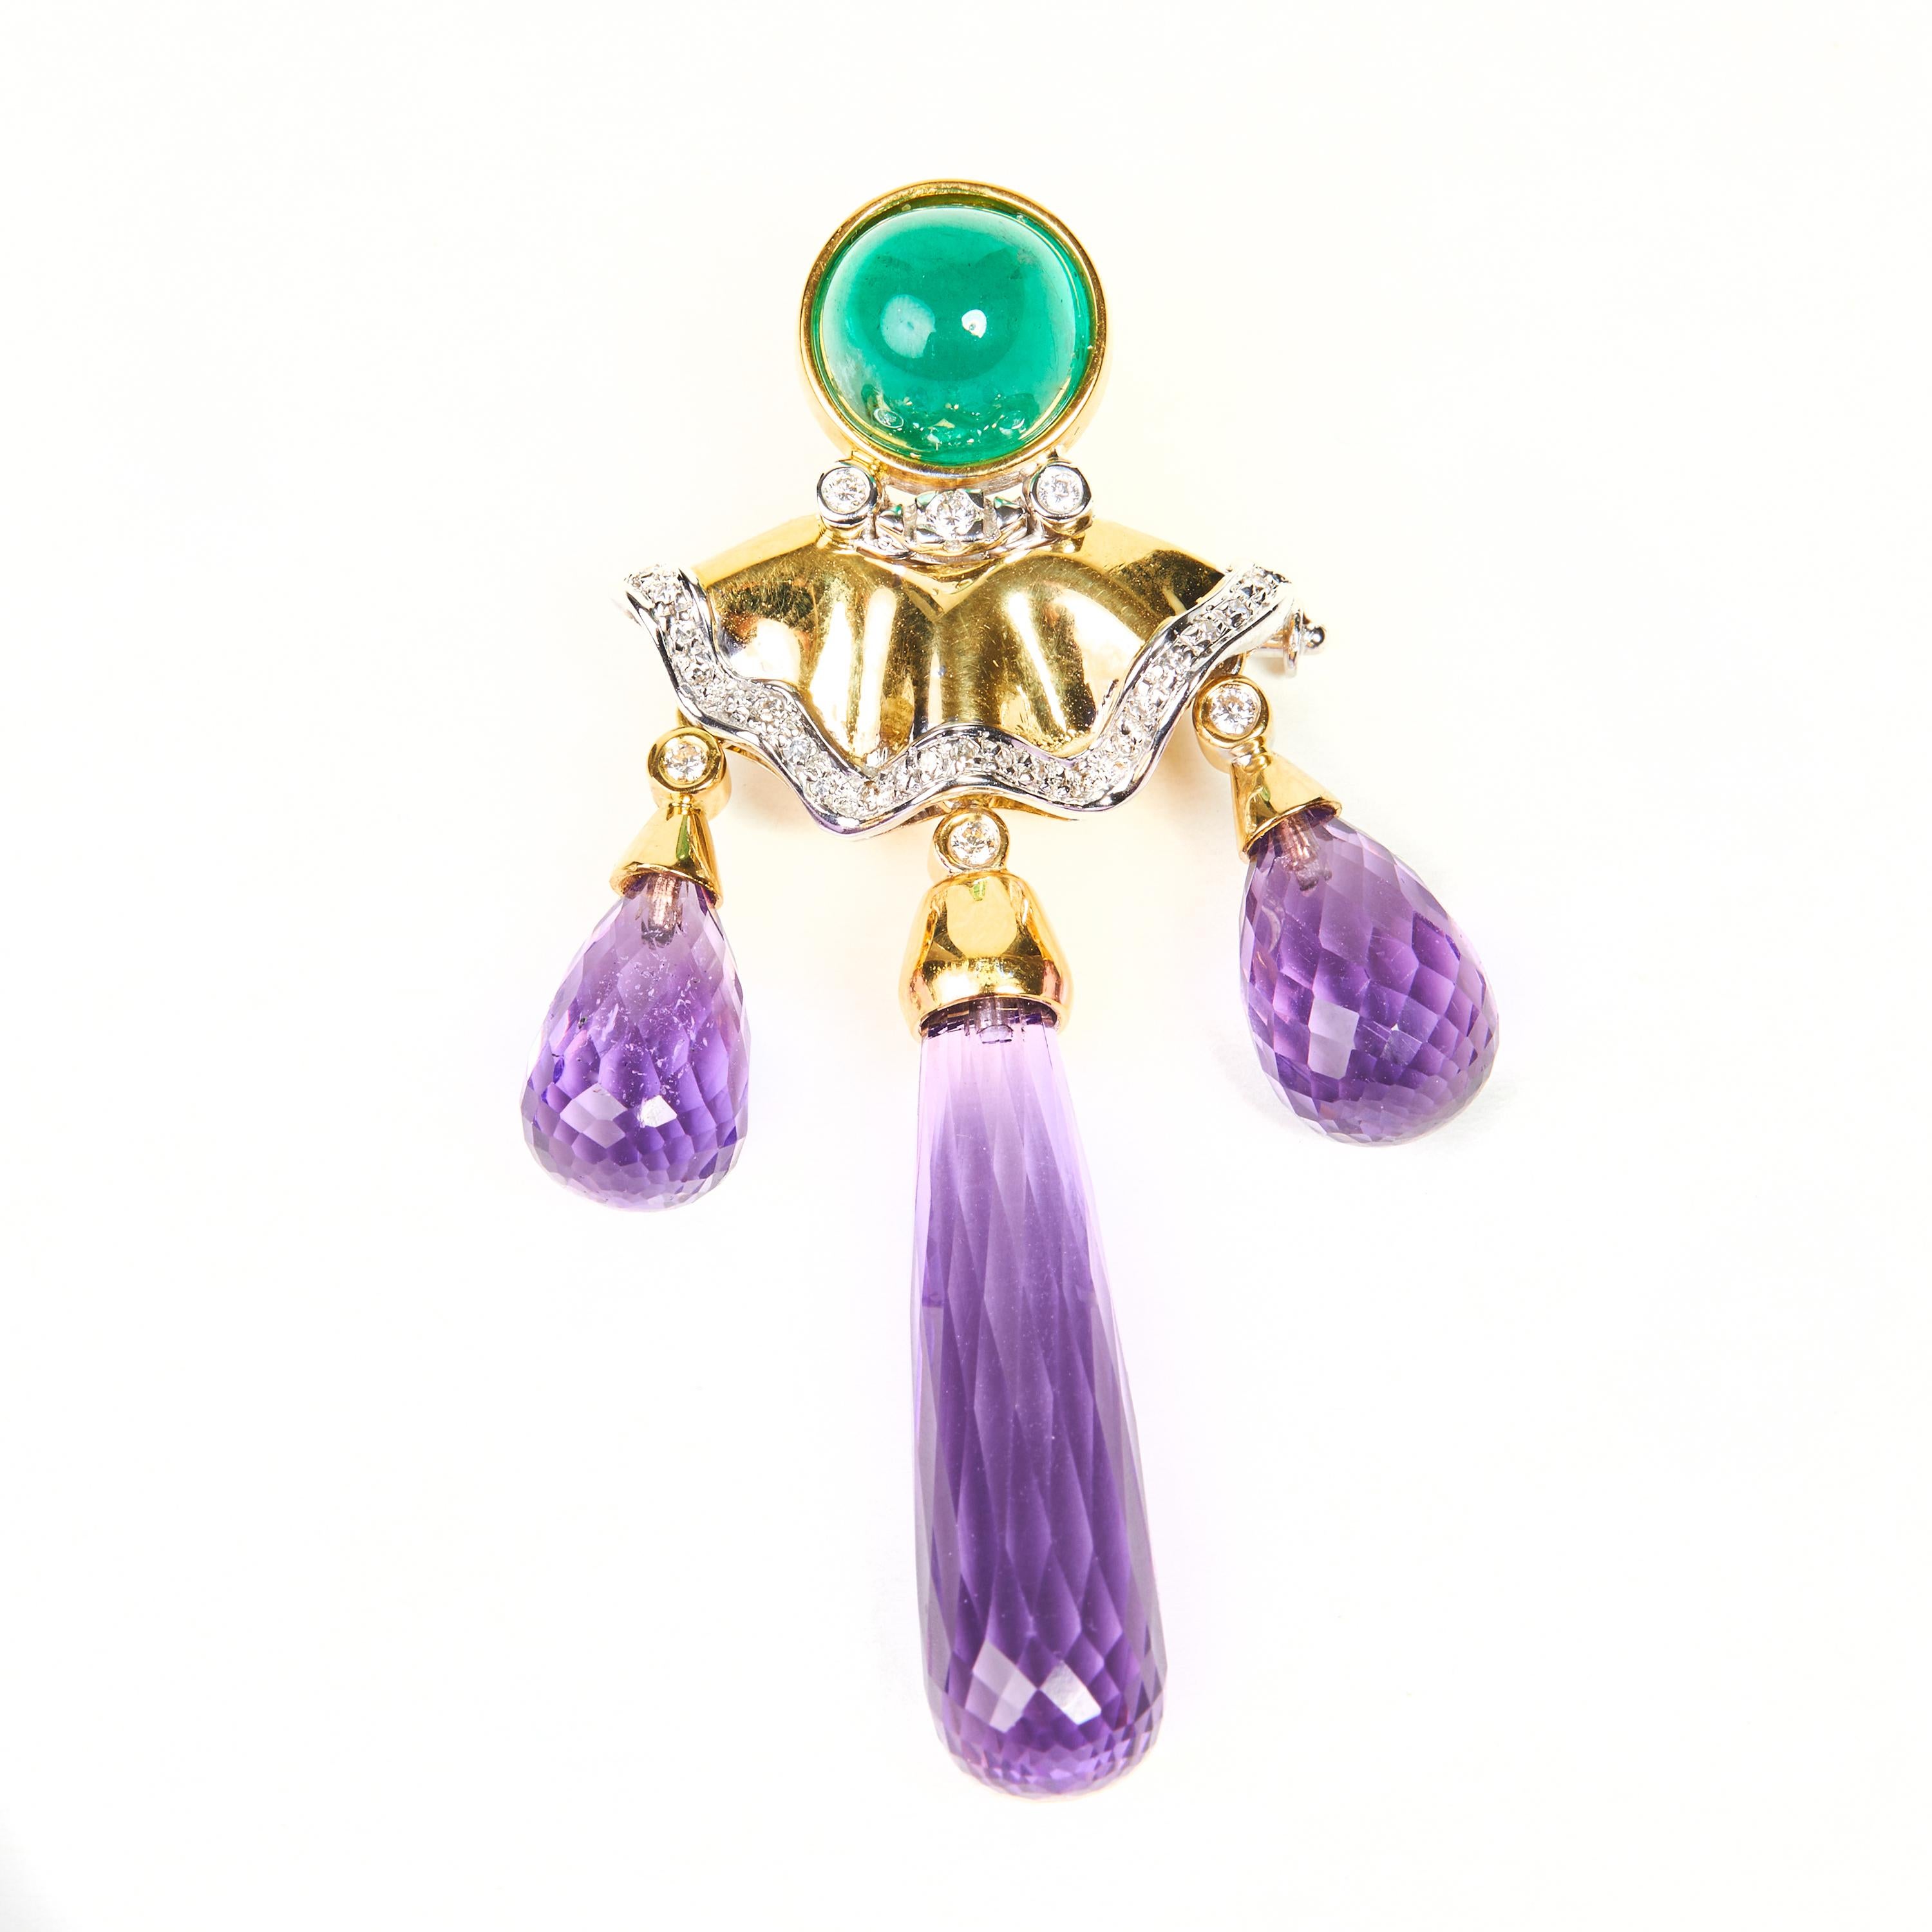 18 Karat  Gold Diamond, Emerald,Amethyst  Brooch-Pendant


30 Diamonds 0.37 Carat
1 Emerald Cab. 4.34 Carat
3 Amethyst Briolette  21.02 Carat



Founded in 1974, Gianni Lazzaro is a family-owned jewelery company based out of Düsseldorf,